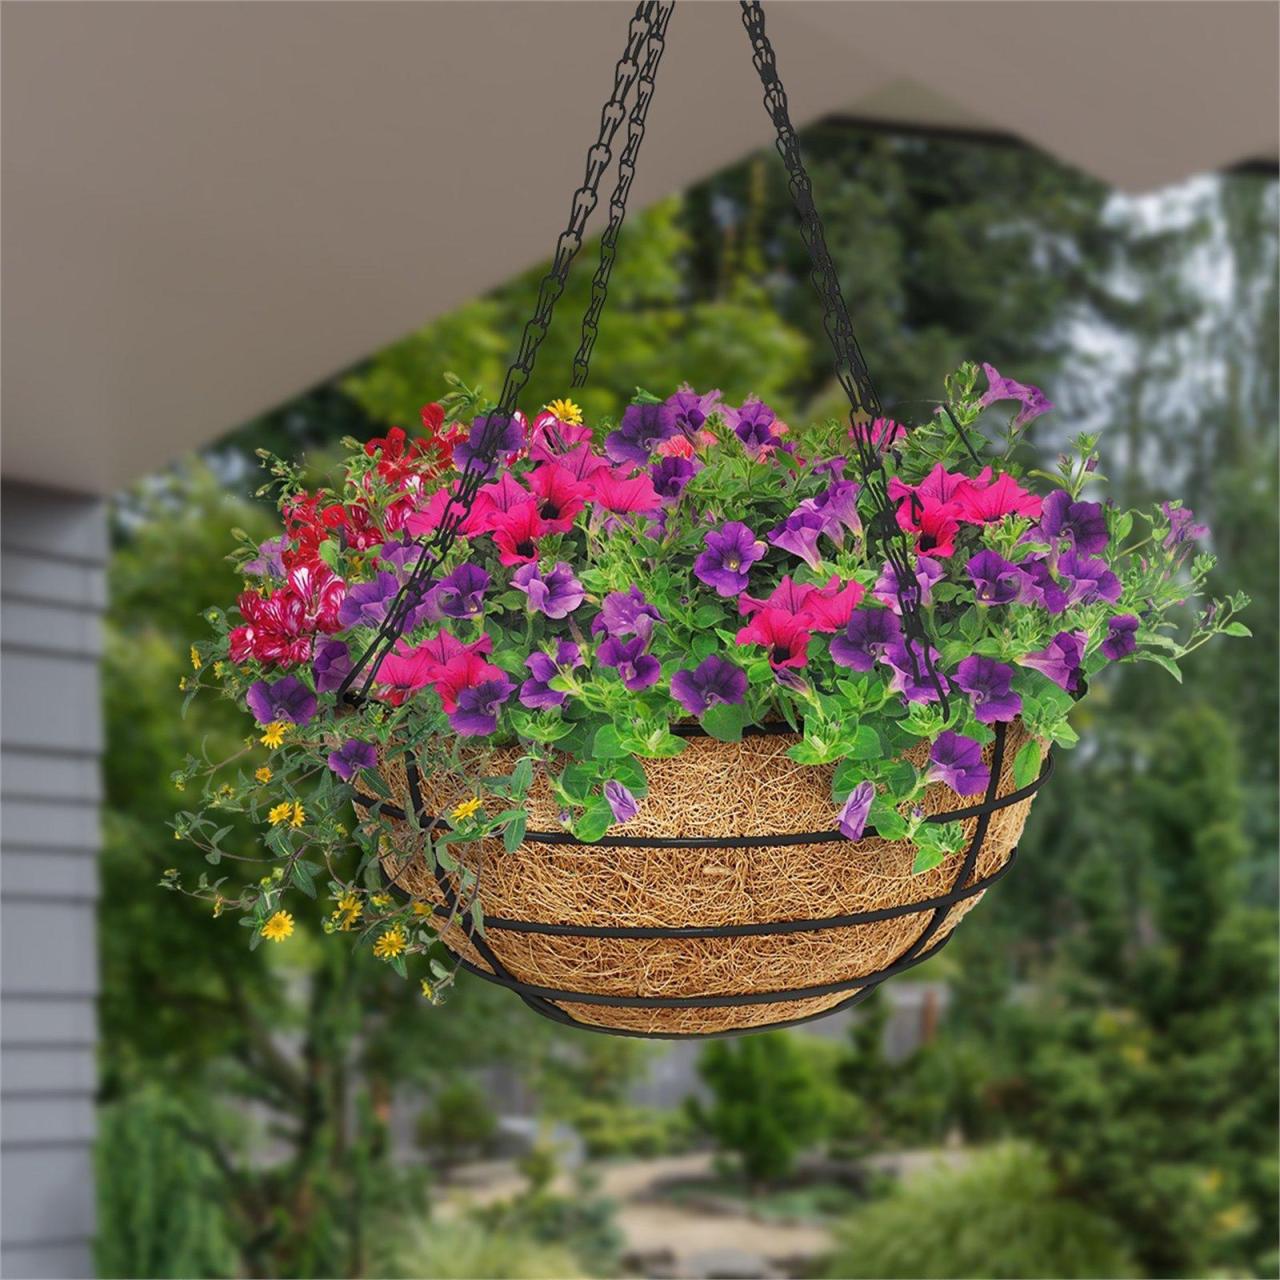 Hanging Plants Indoor | Bunnings Hanging Plant Pots: A Guide to Materials, Styles, and Care